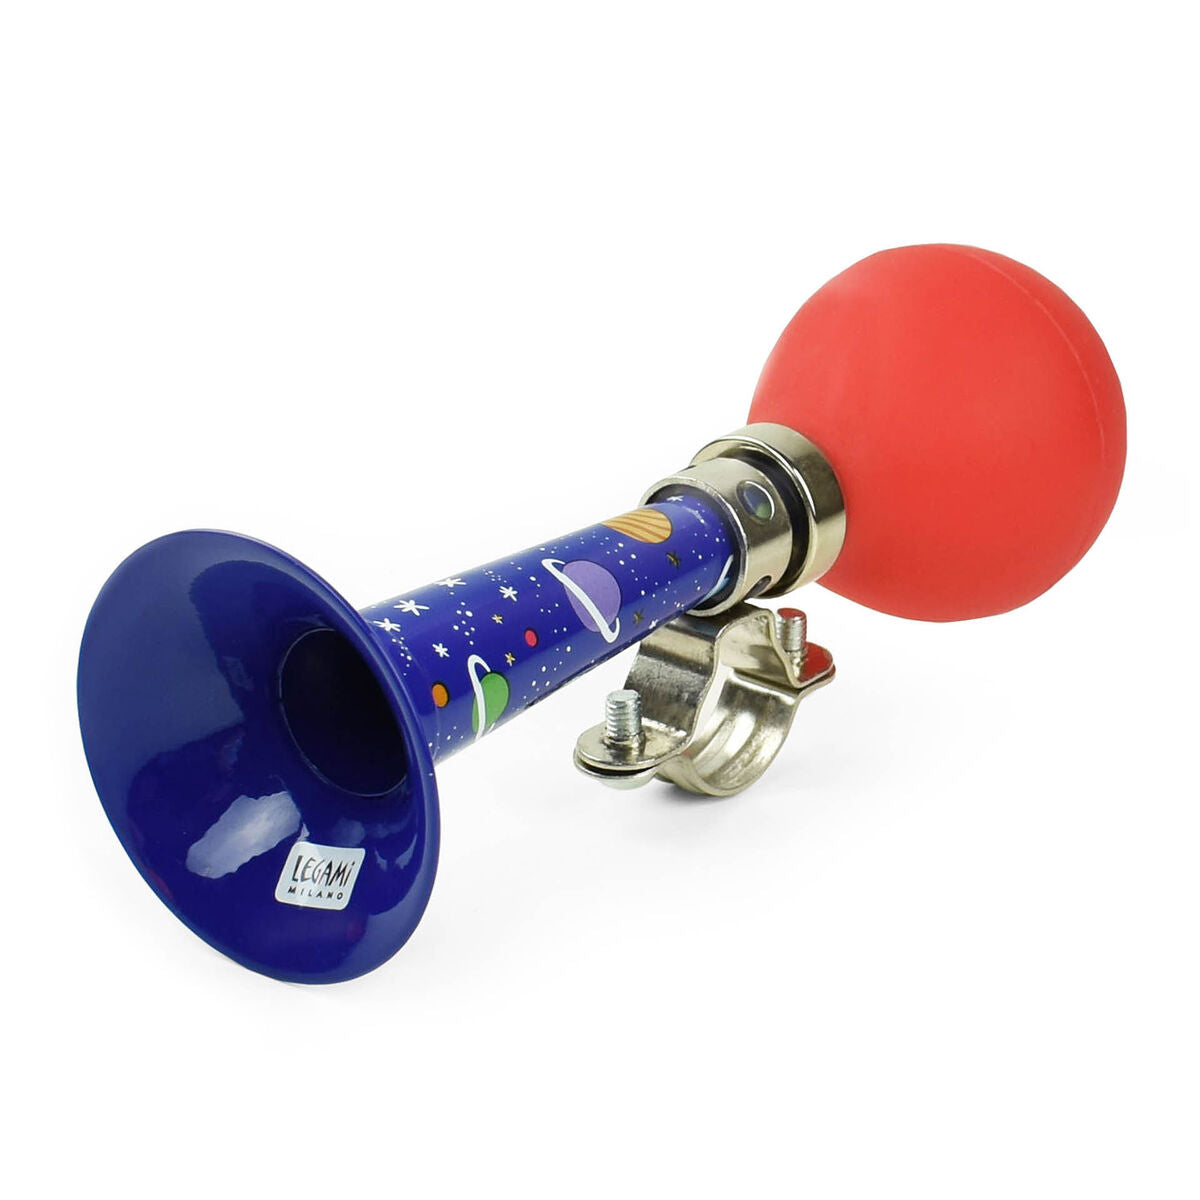 Fab Gifts | Legami Bike Horn - Space by Weirs of Baggot Street